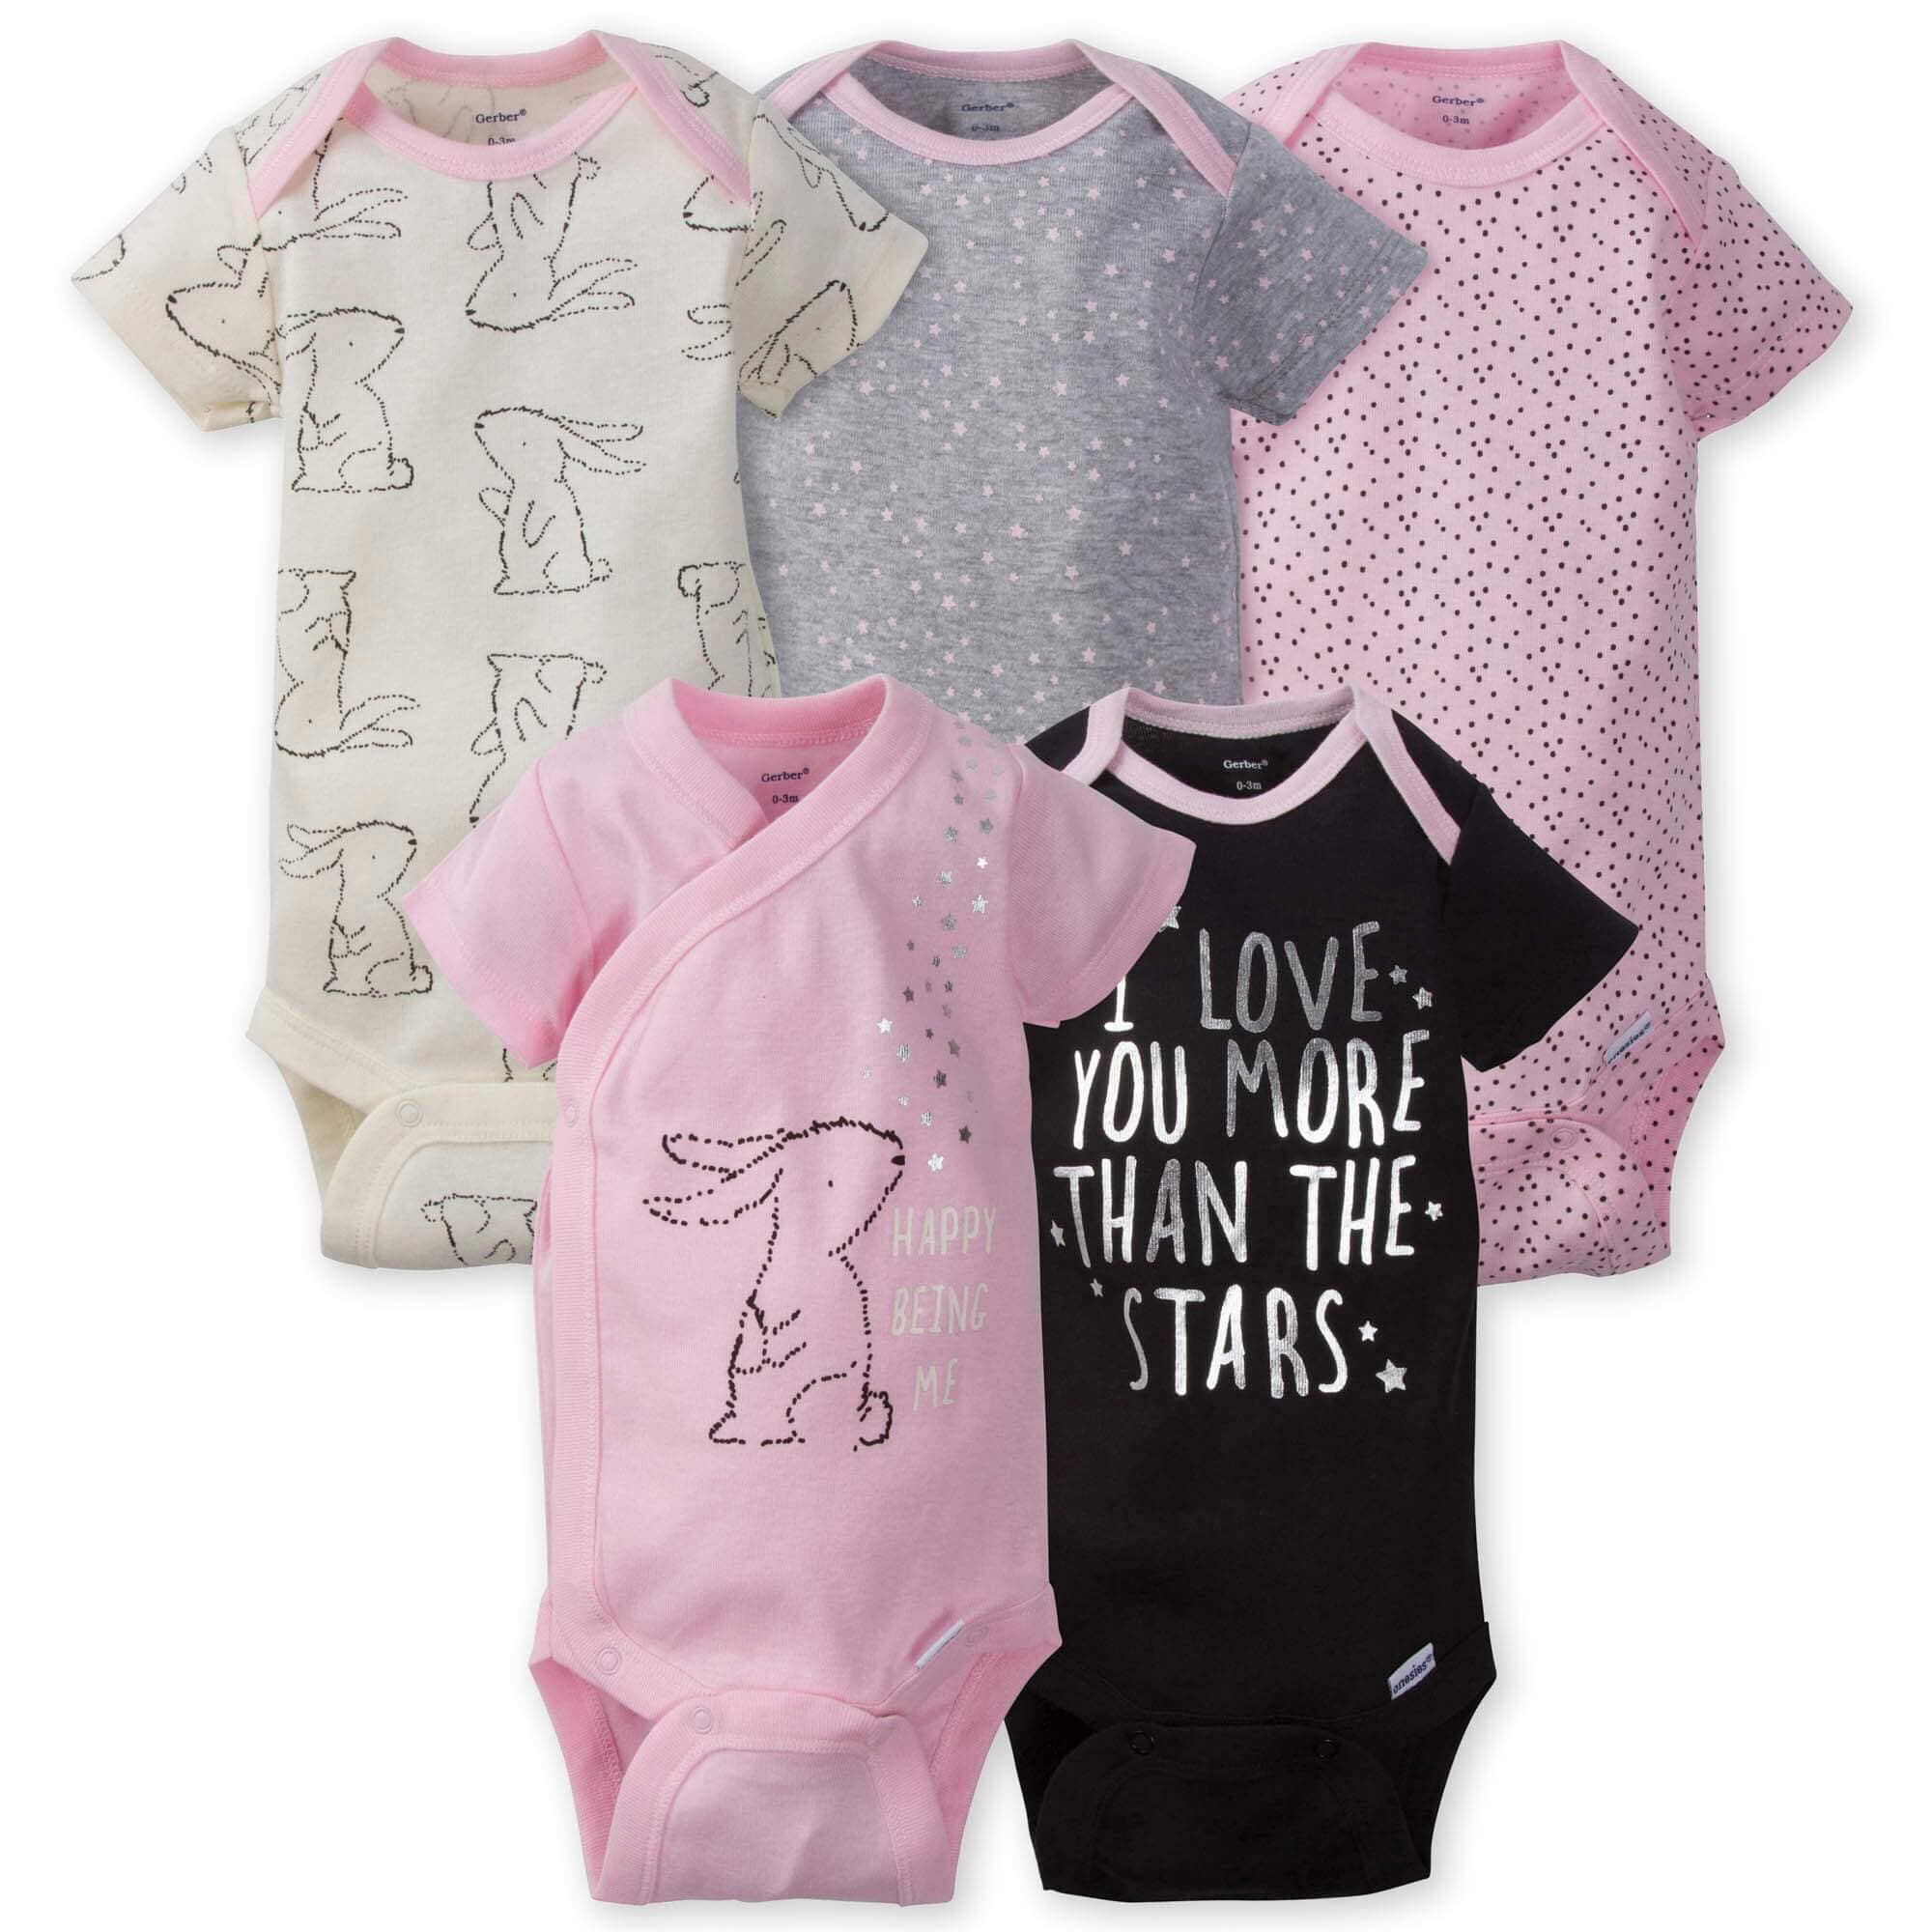 just born baby clothes online